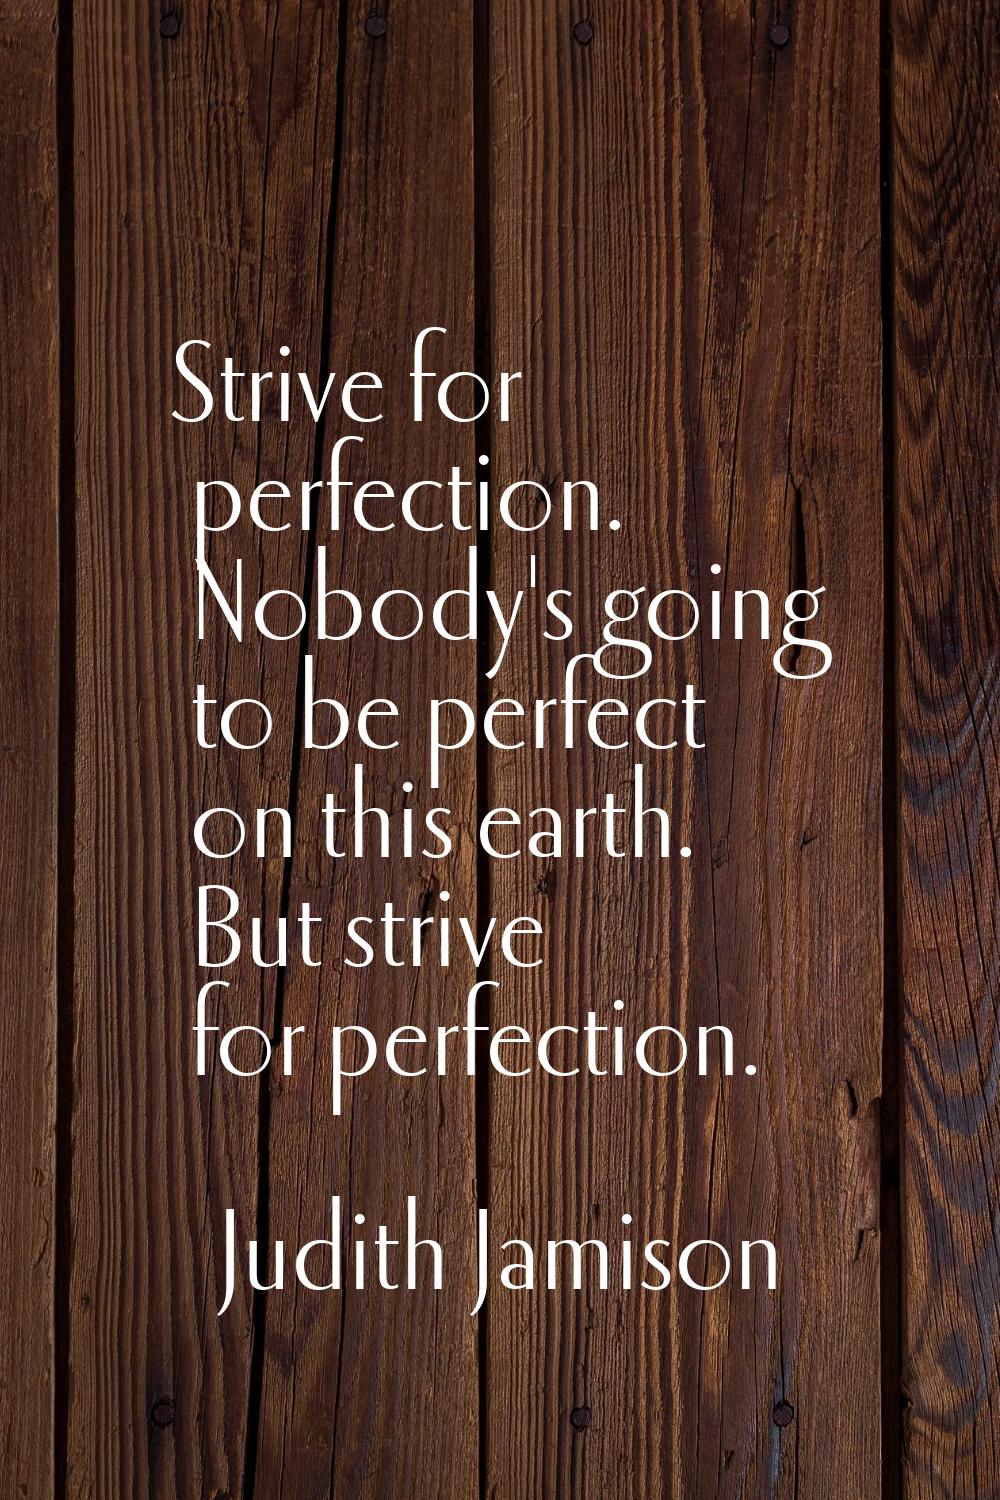 Strive for perfection. Nobody's going to be perfect on this earth. But strive for perfection.